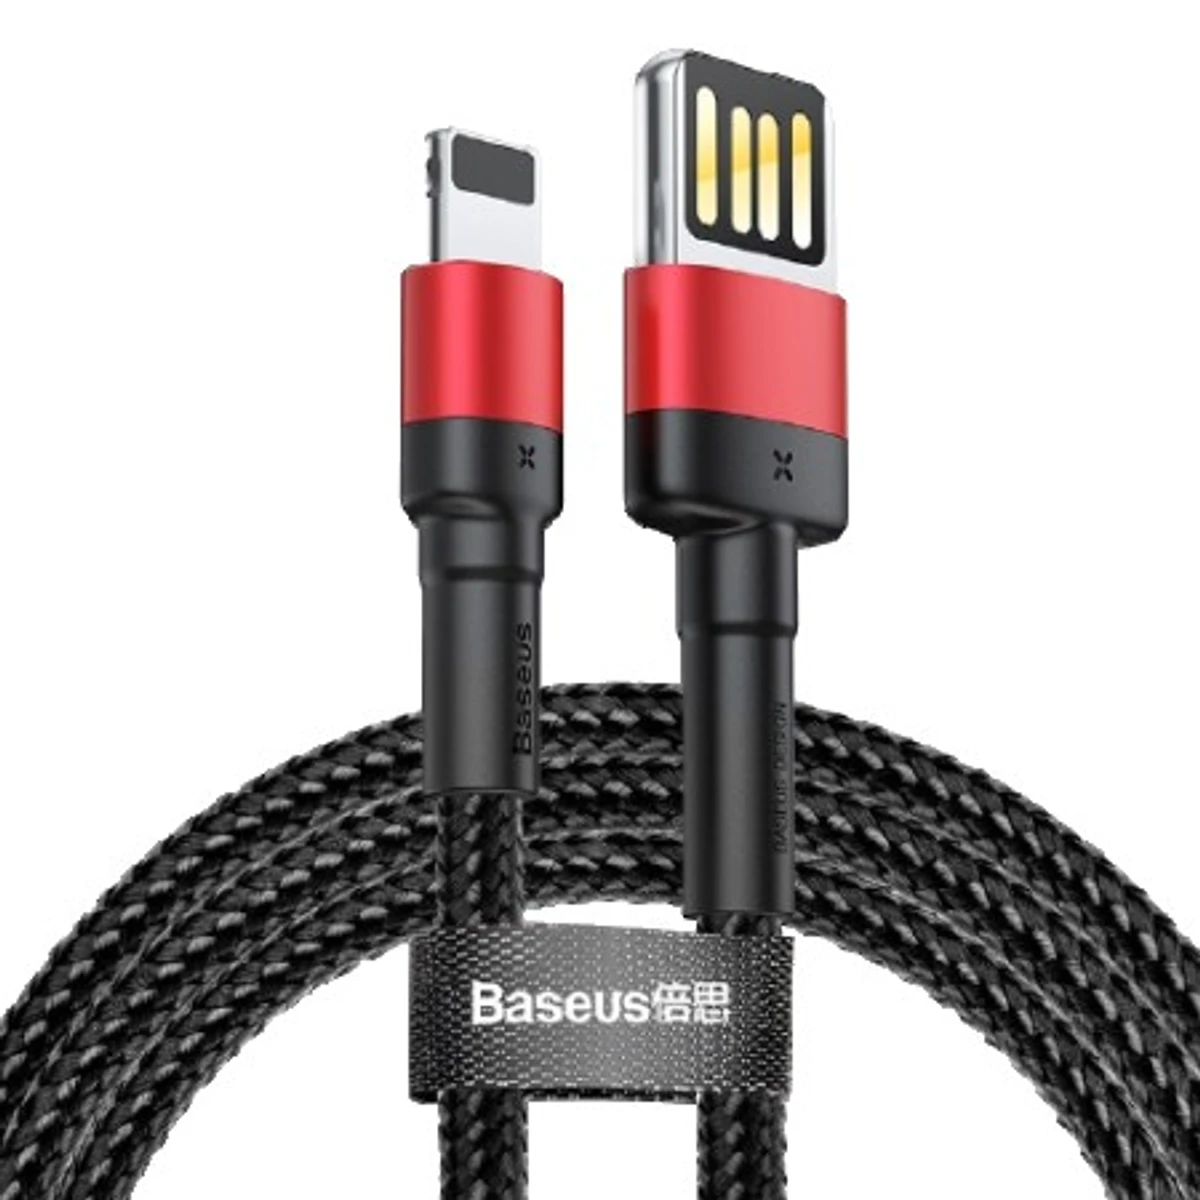 Baseus Reversible USB Charging Cable for iPhone